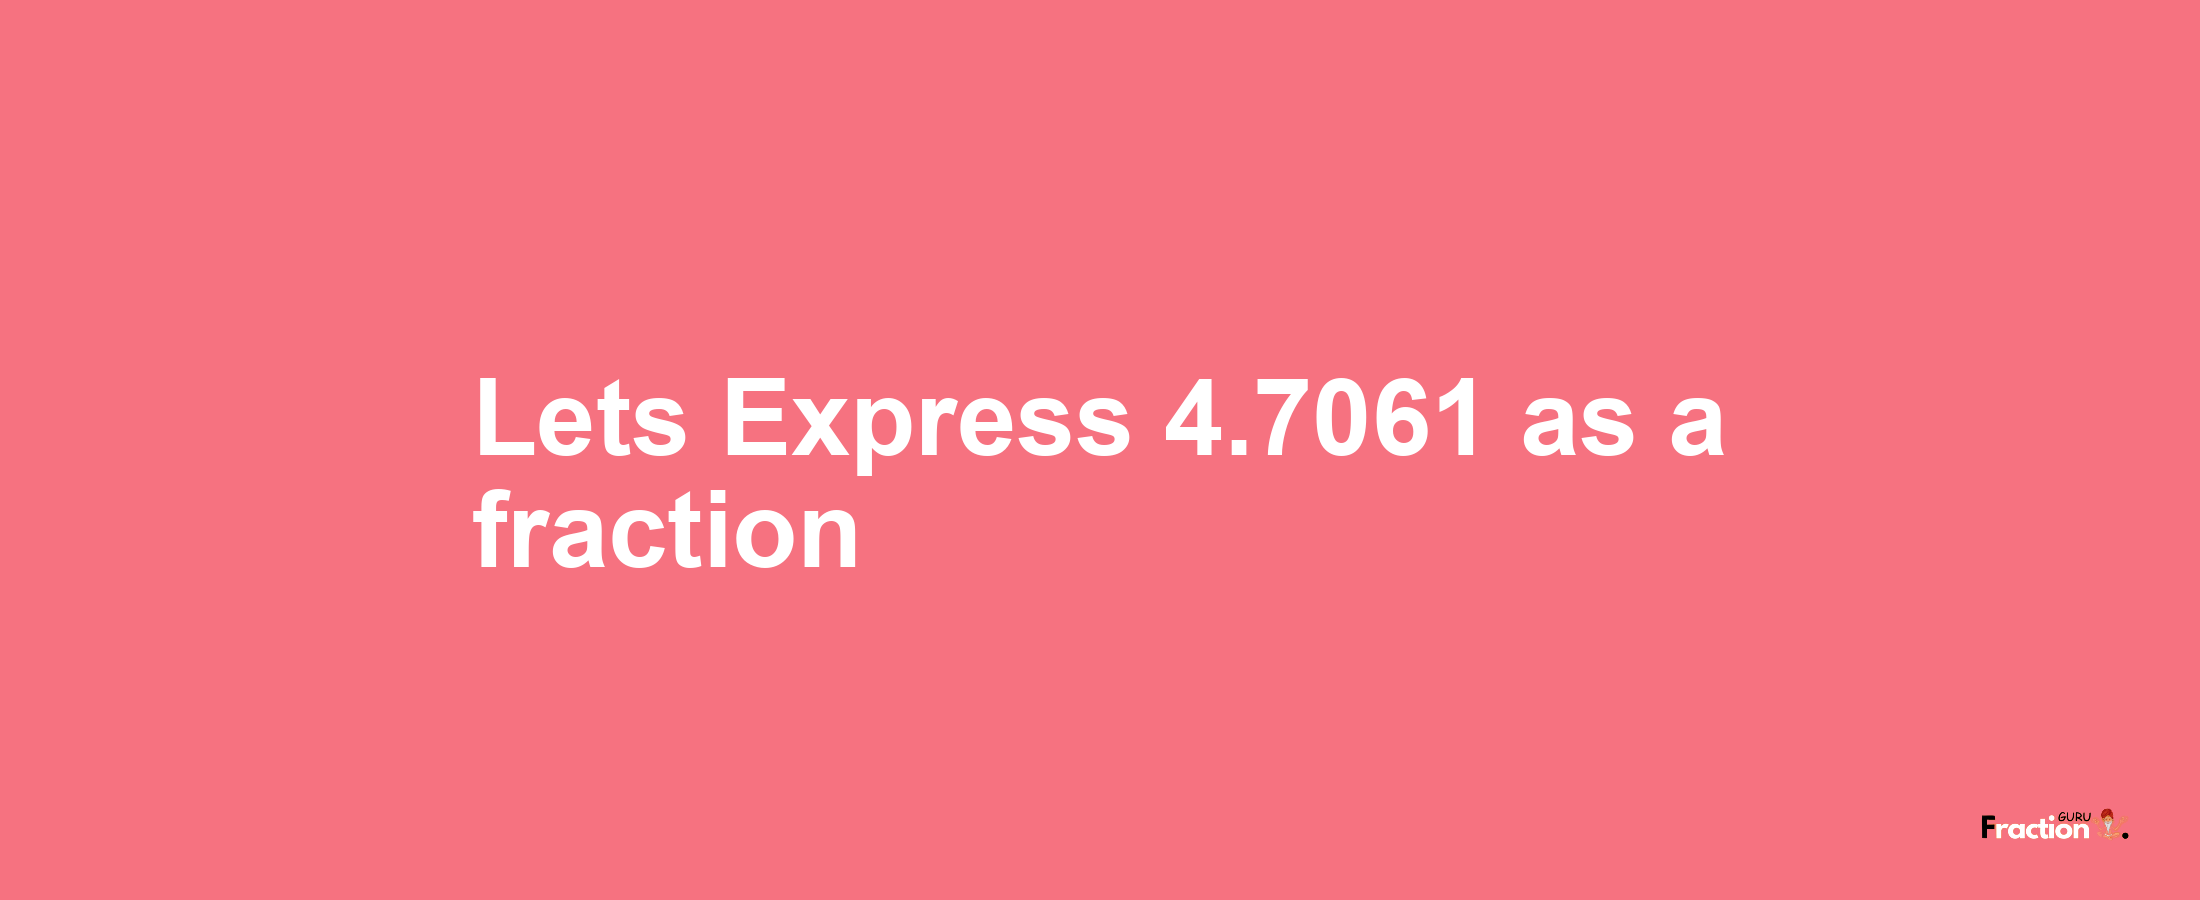 Lets Express 4.7061 as afraction